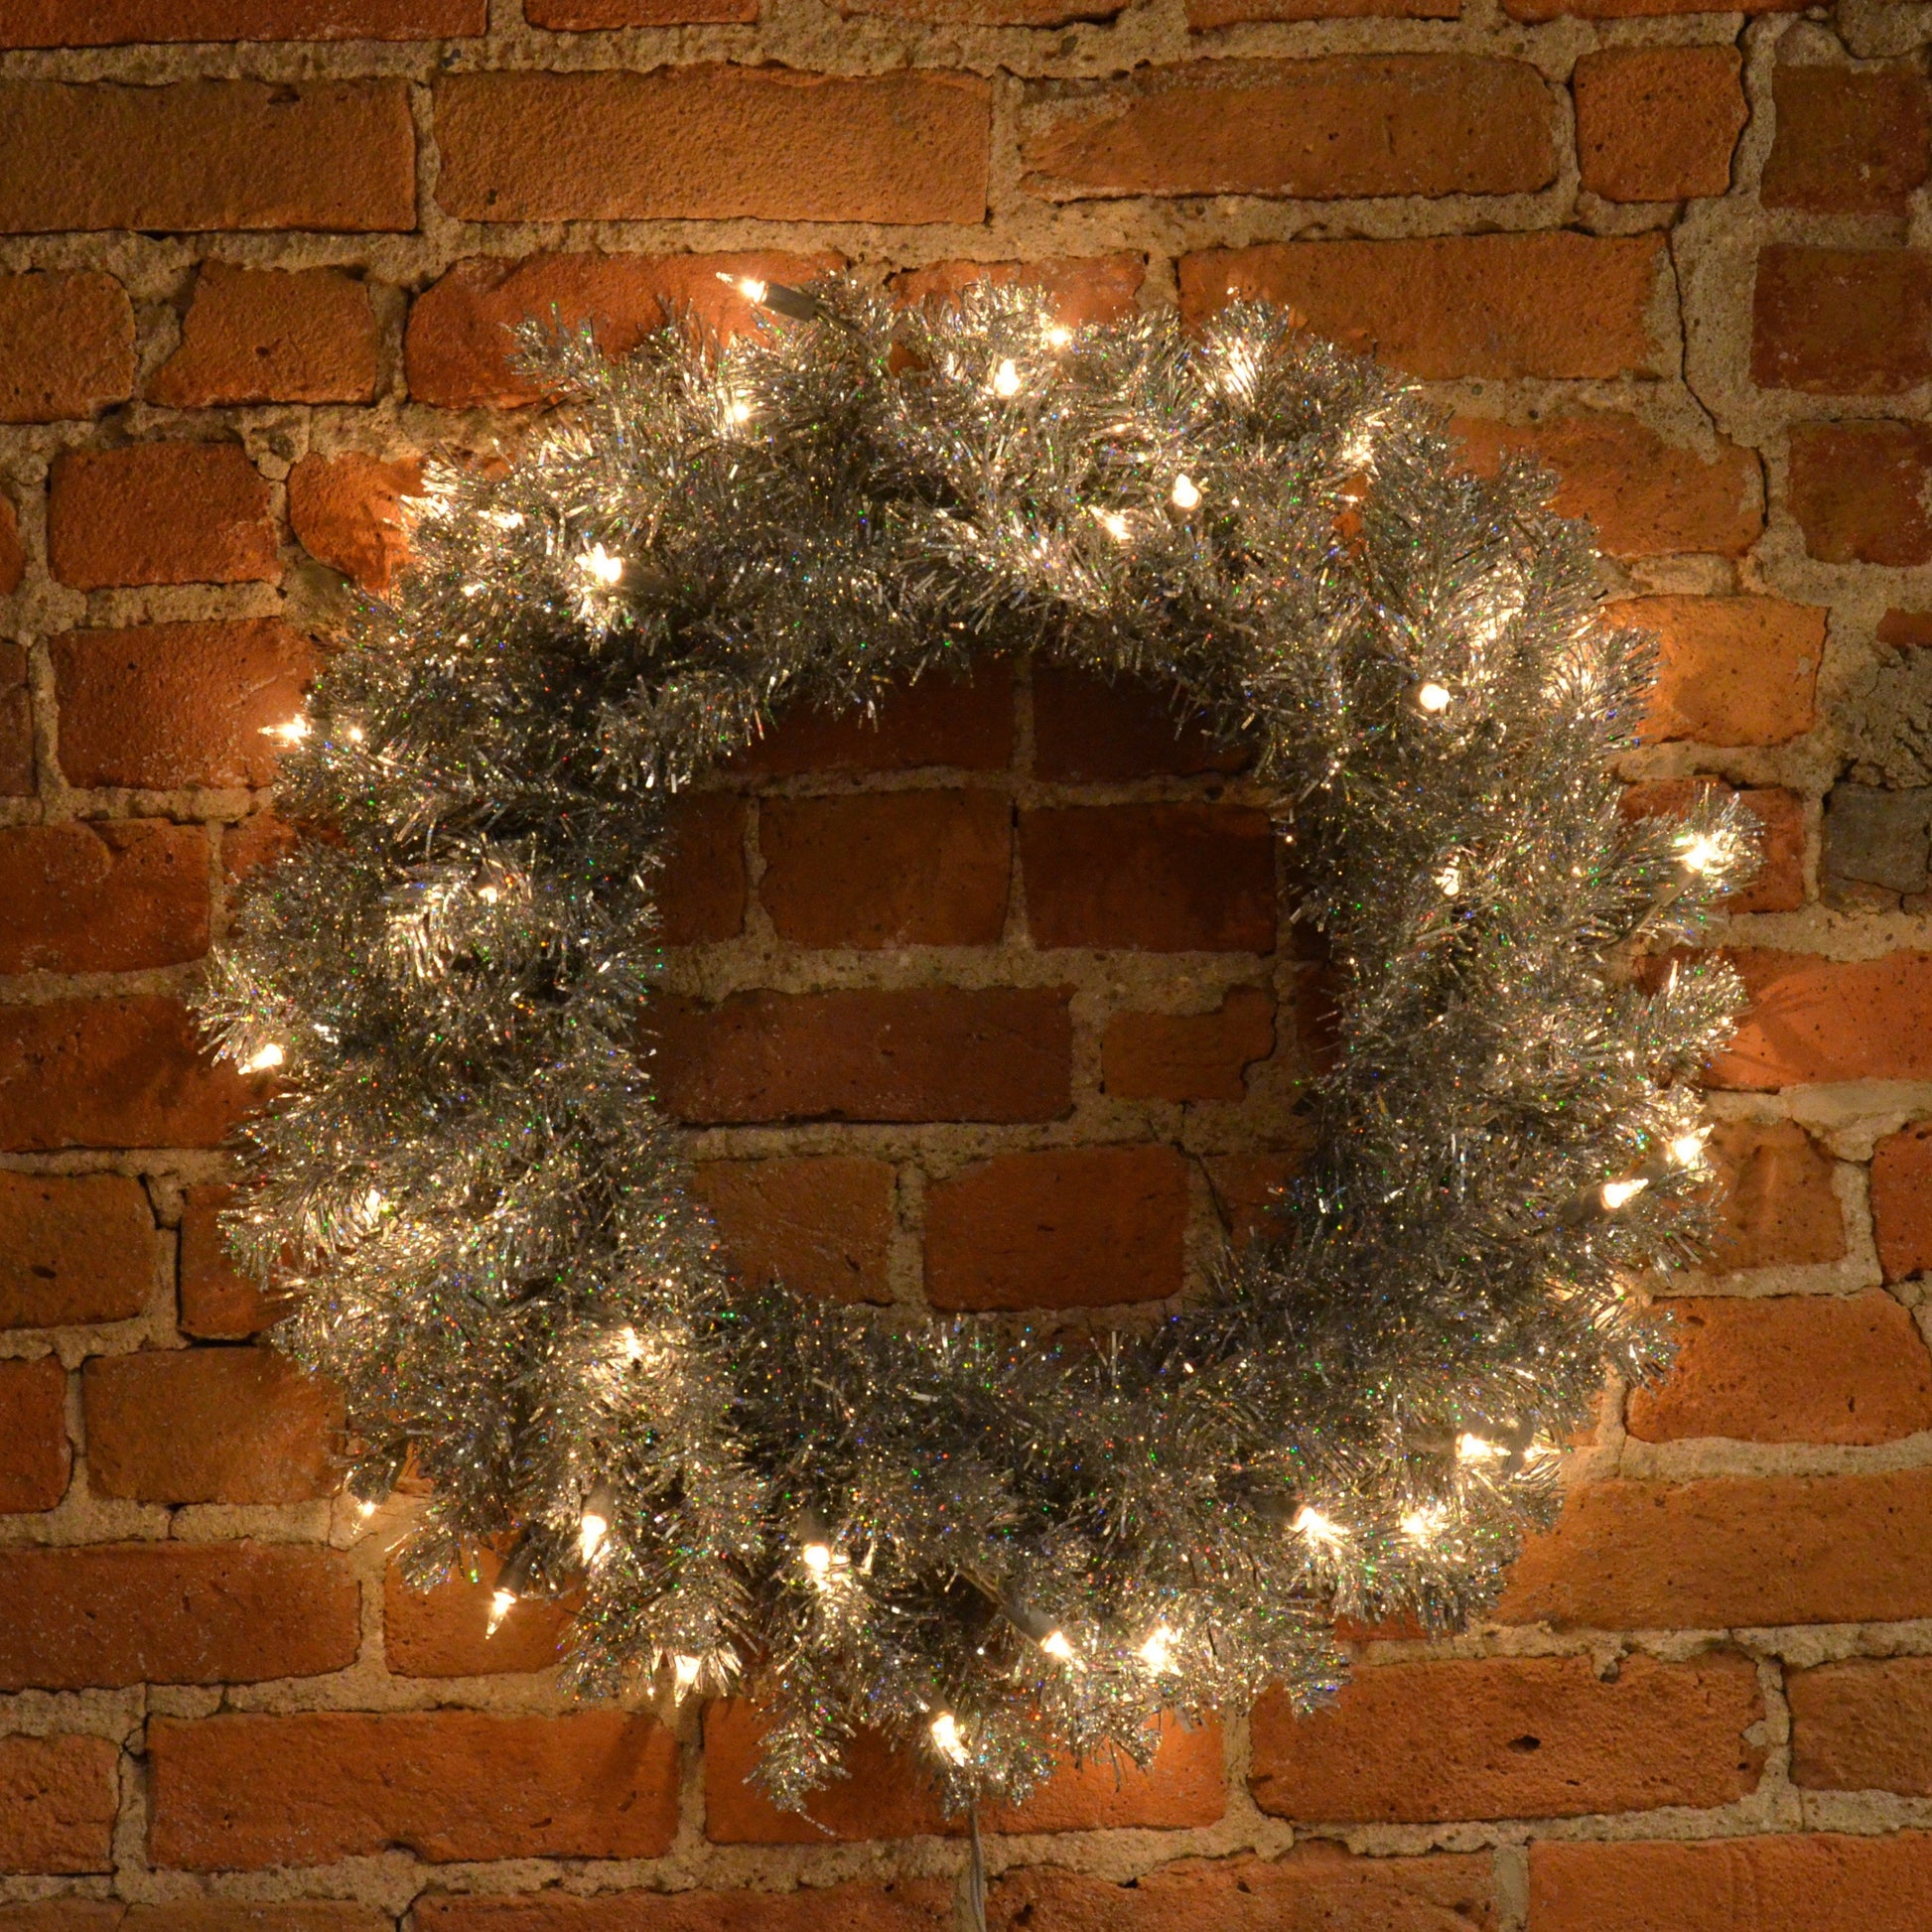 24“ Silver Artificial Christmas Wreath with 180 PVC Tips and 50 Warm White Dura-Lit Italian LED Mini Lights. Incorporate bright and modern holiday décor into your space with this beautiful wreath